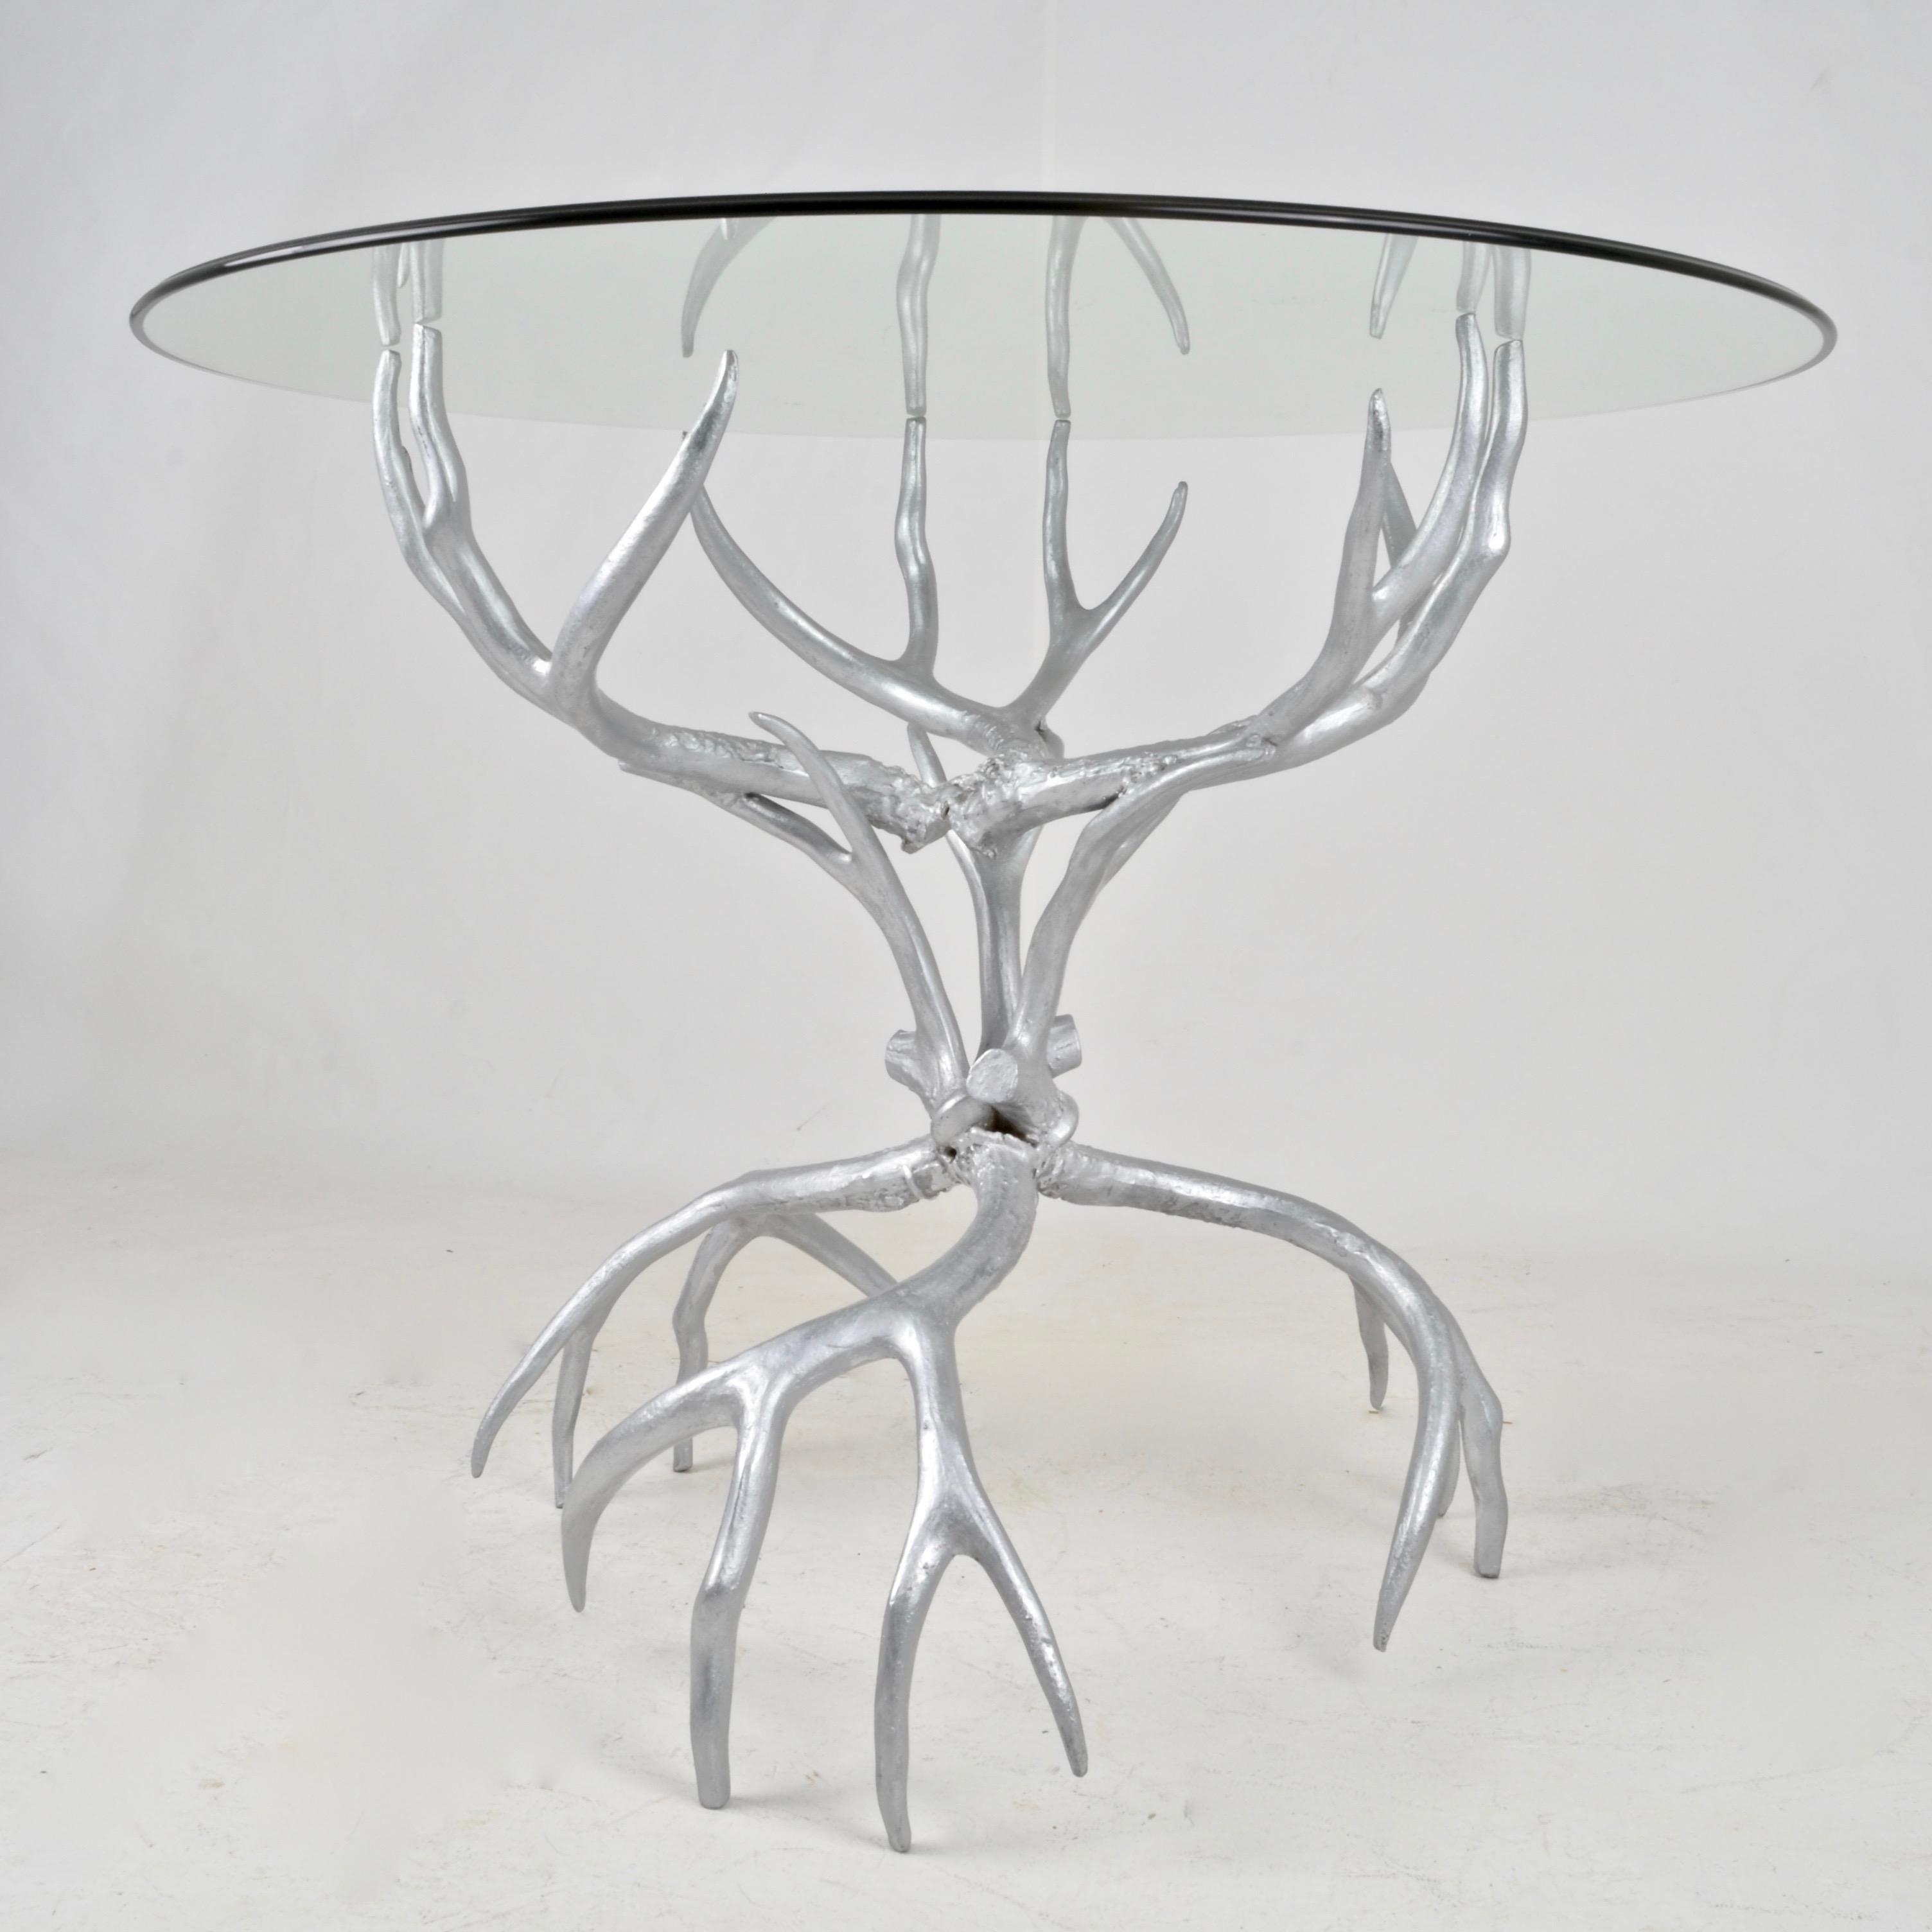 Beautifully cast, Arthur Court's antler inspired furniture combines terrific charm and practicality. The design replicates actual antlers combined to form a sturdy and durable table base. New glass topper is 1/2